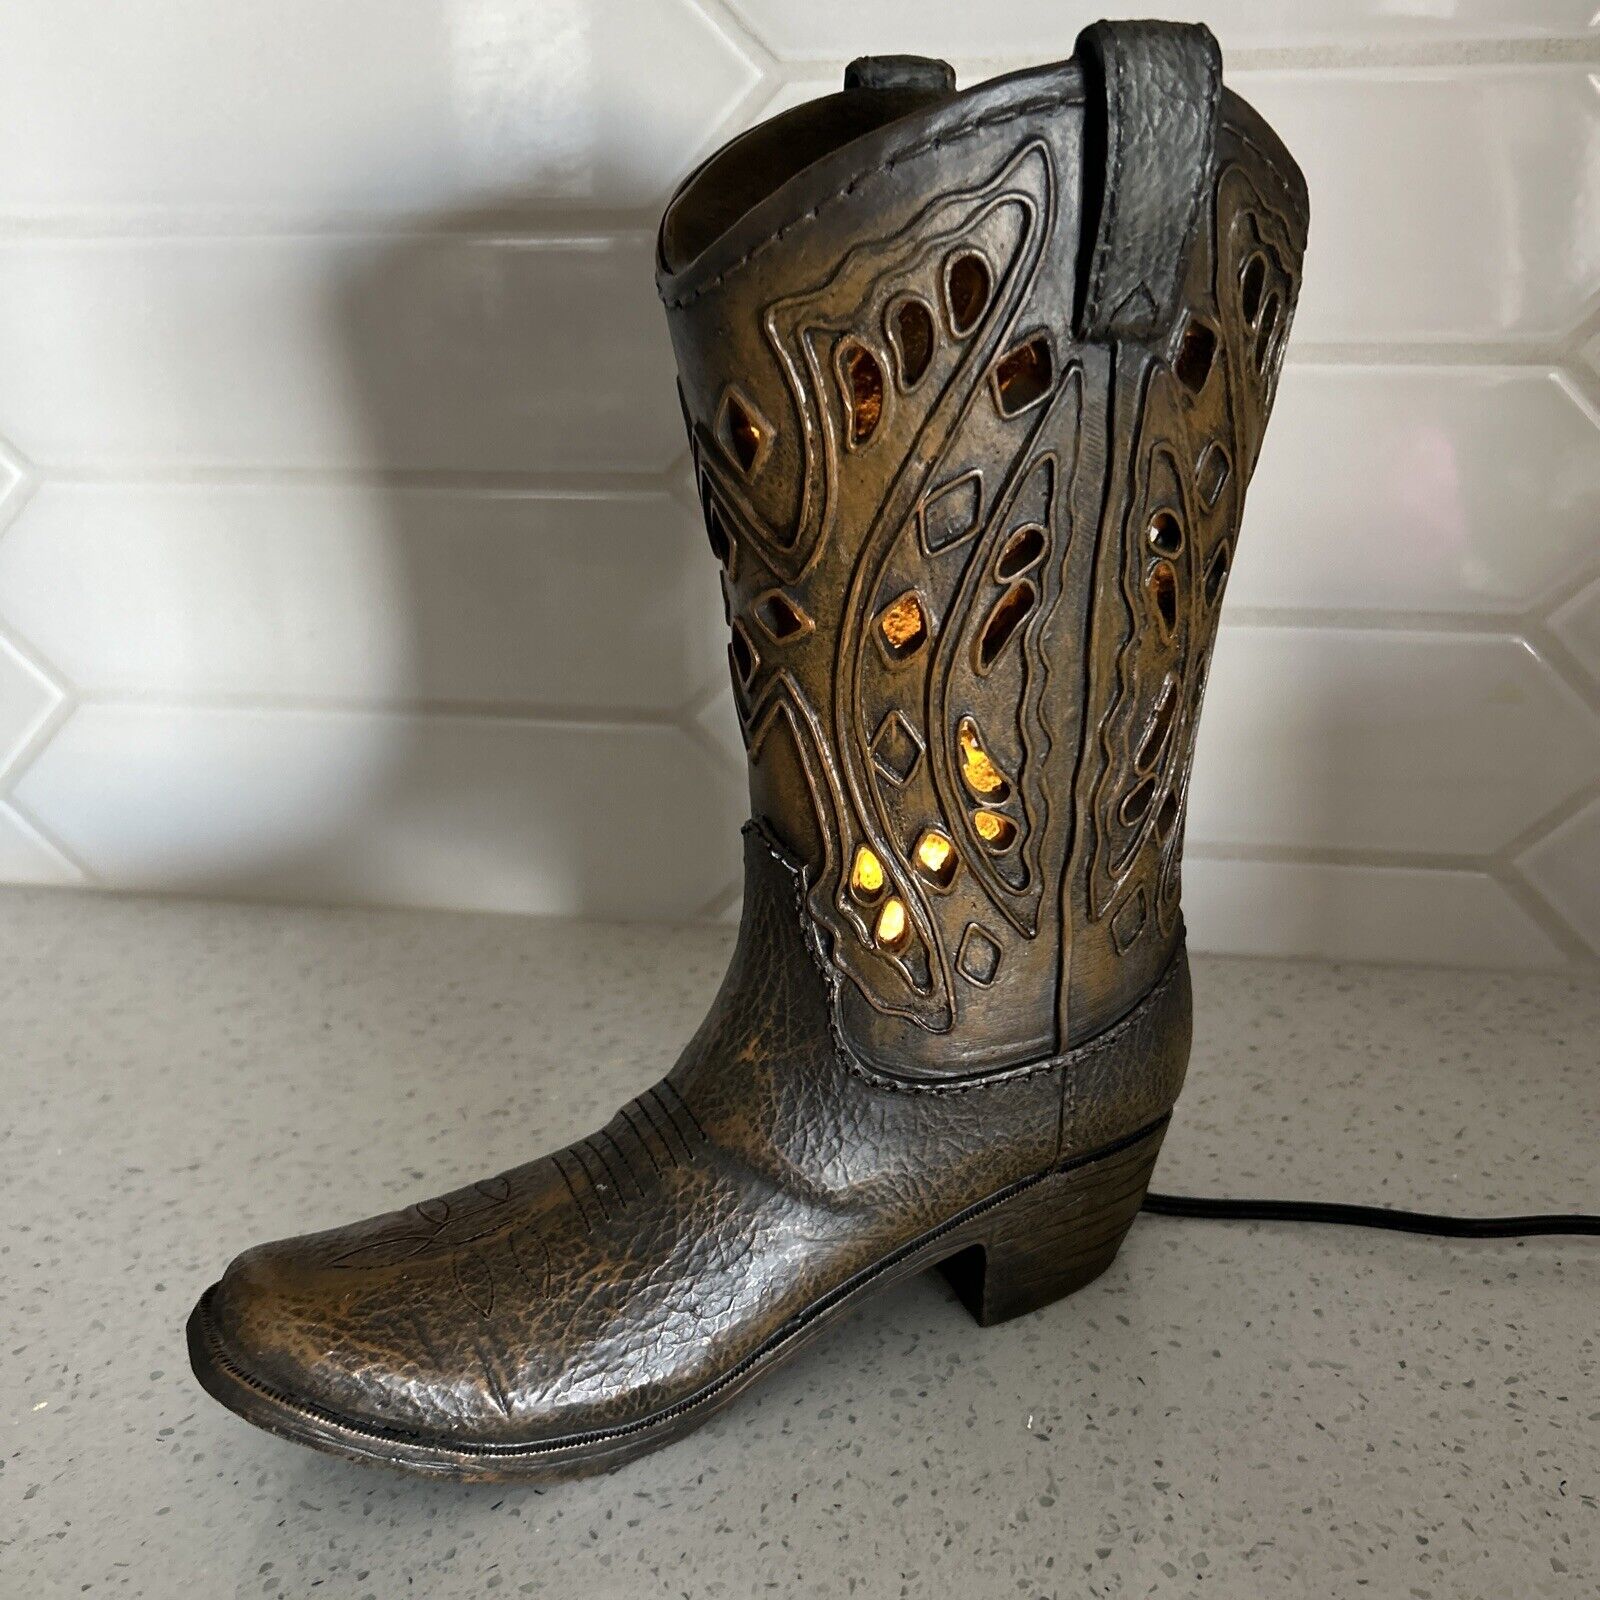 Cowboy Boot Lamp Cowboy Boot Night Light Cowboy Boot Accent Lamp Plug In Cord